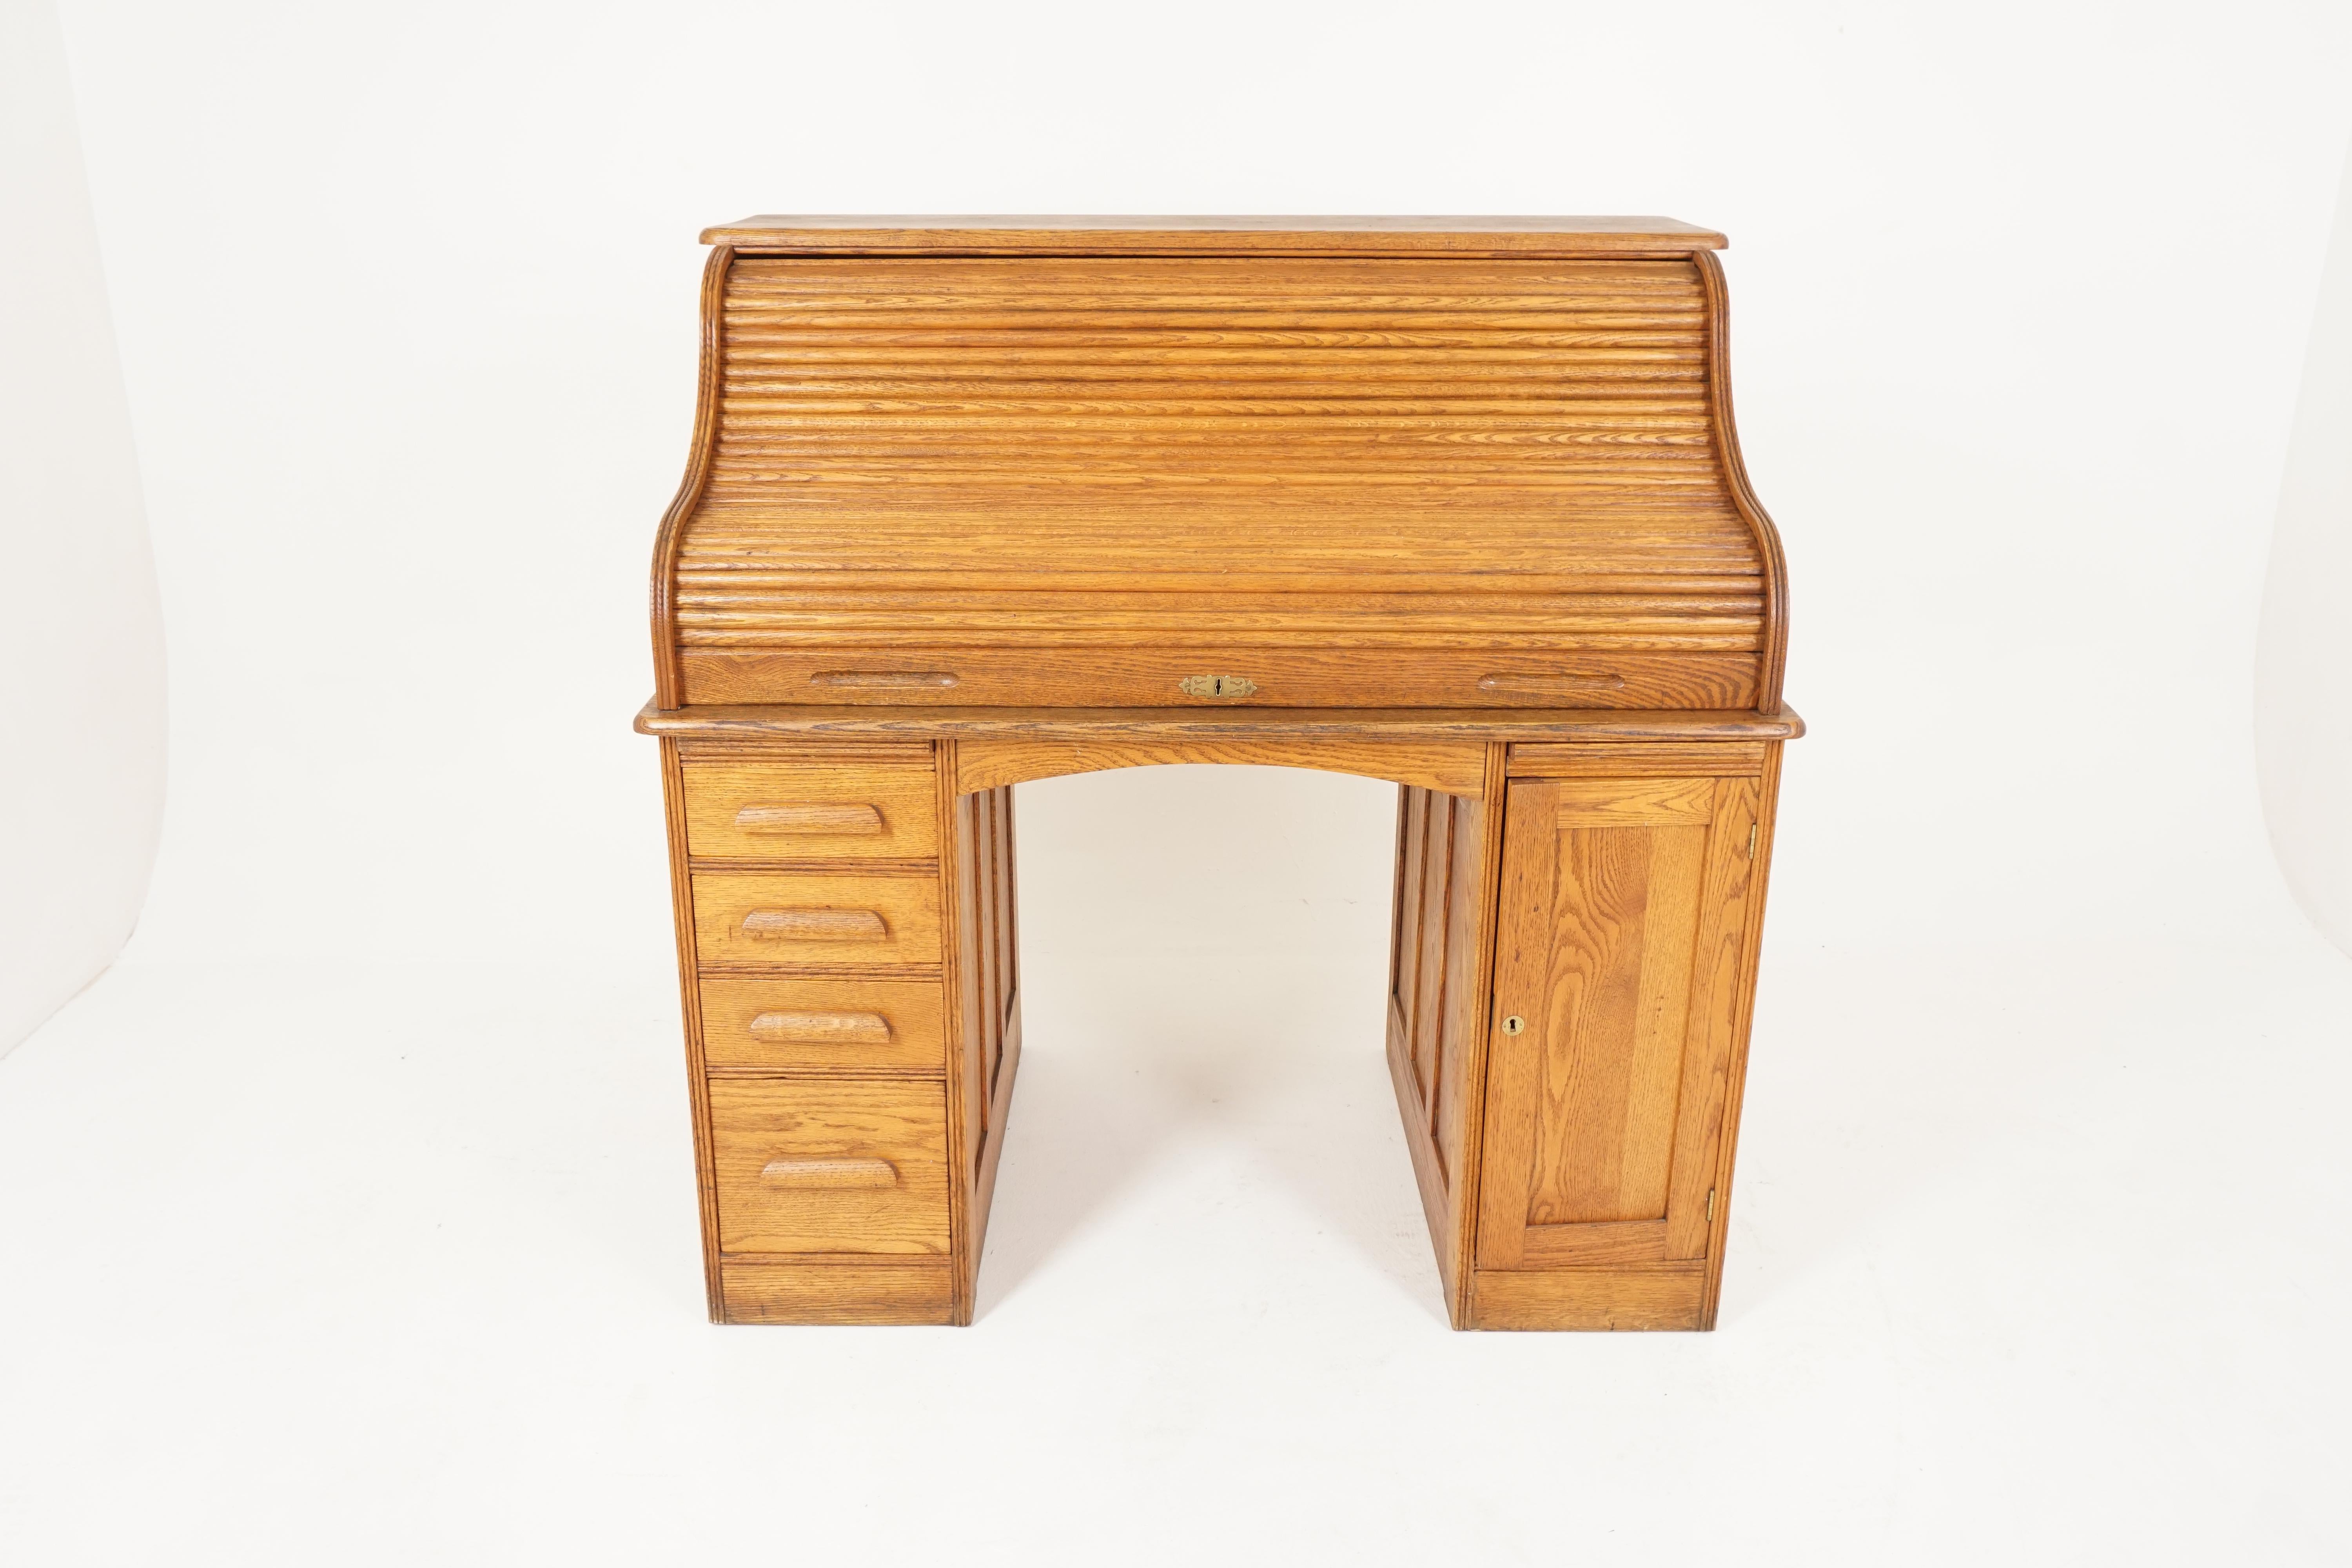 Antique oak roll top desk, double pedestal, American 1900, B2515 

American, 1900
Solid oak
Original finish
High back
Fitted interior with mail slot on the ends
Sitting on a pair of pedestals
The right side opens three cubby holes on top and